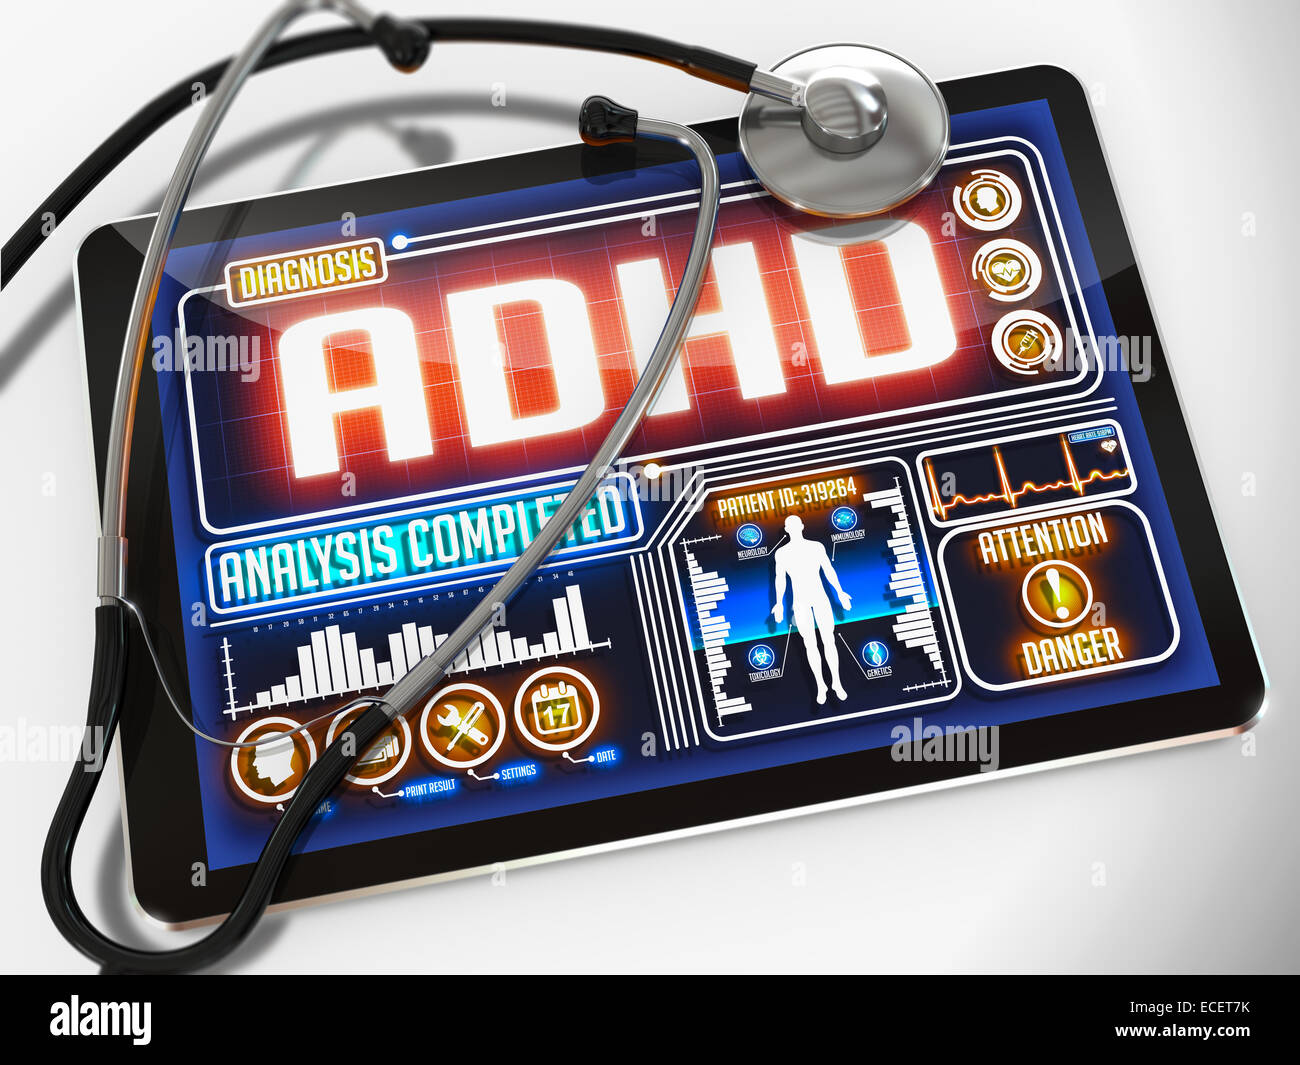 ADHD on the Display of Medical Tablet. Stock Photo